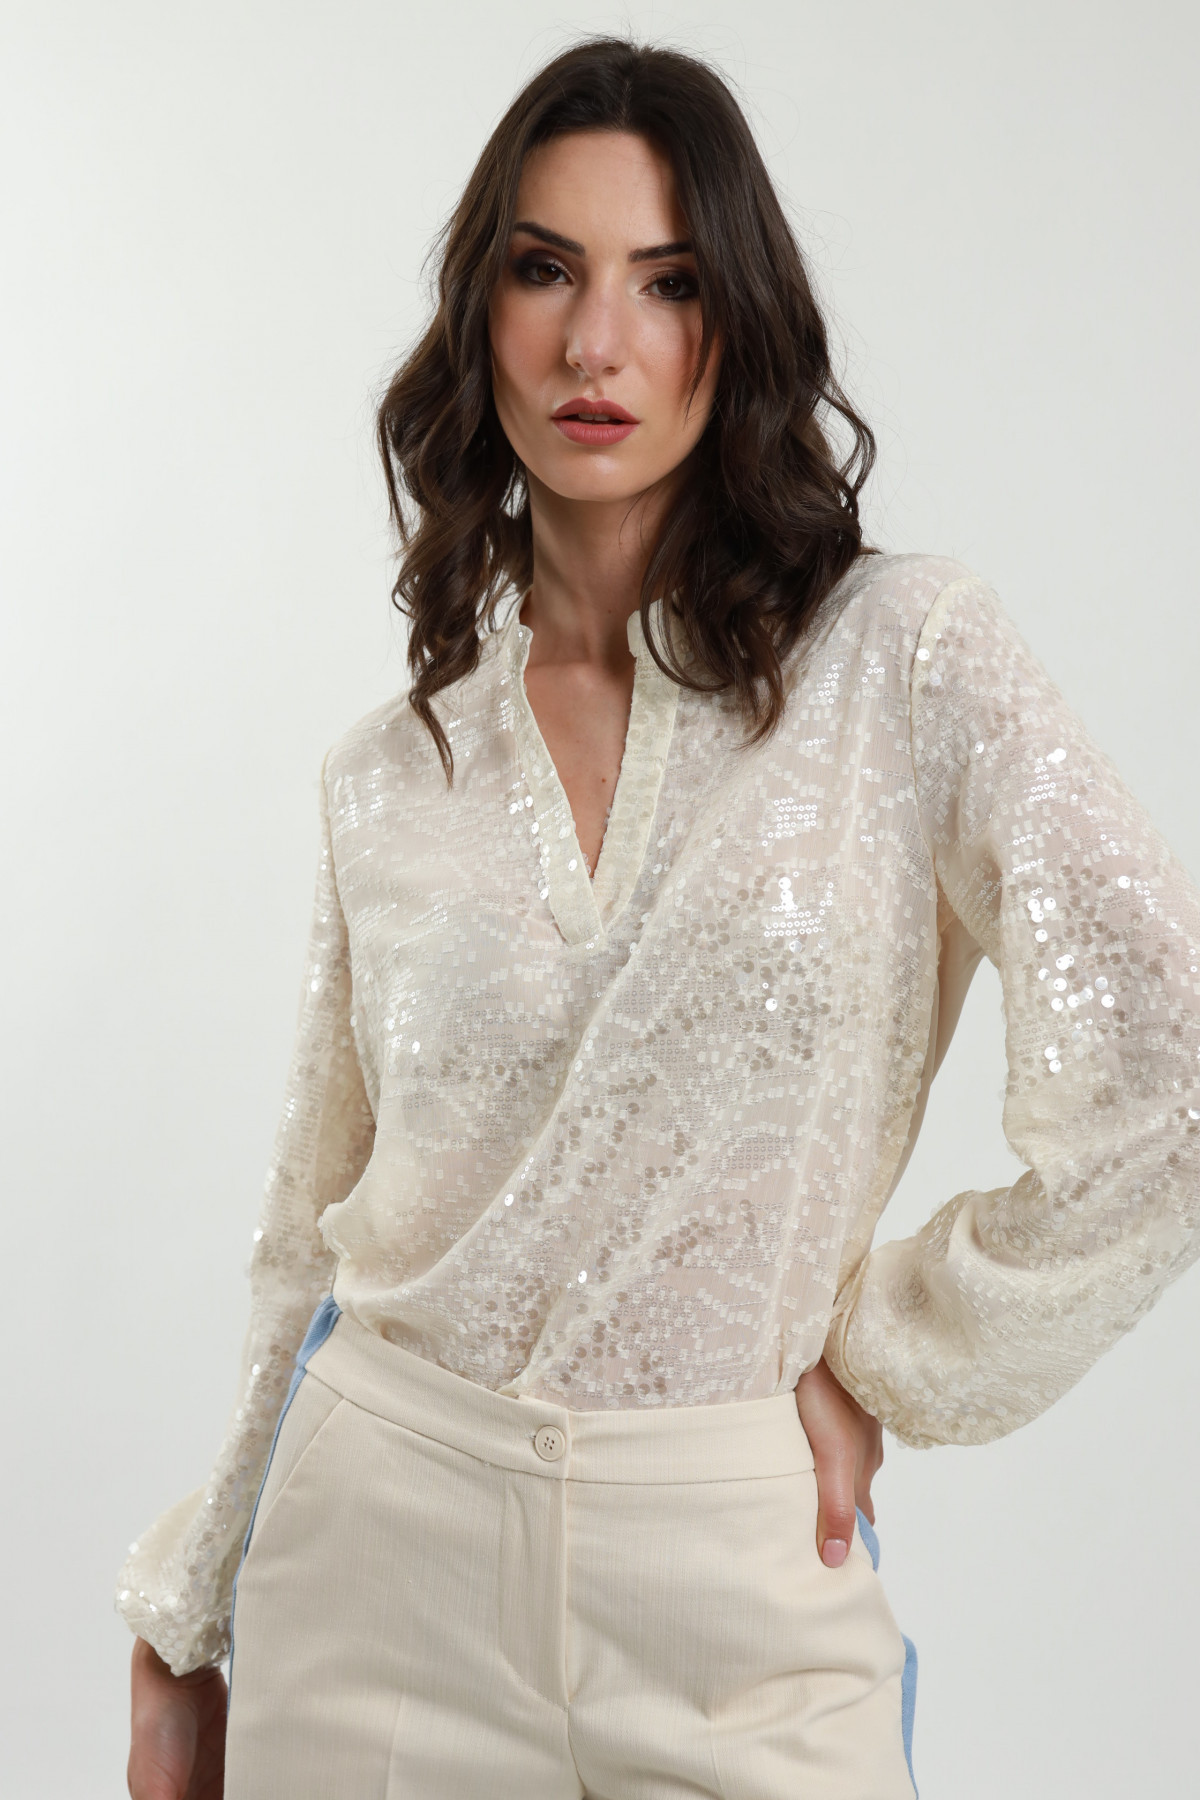 Sequined blouse